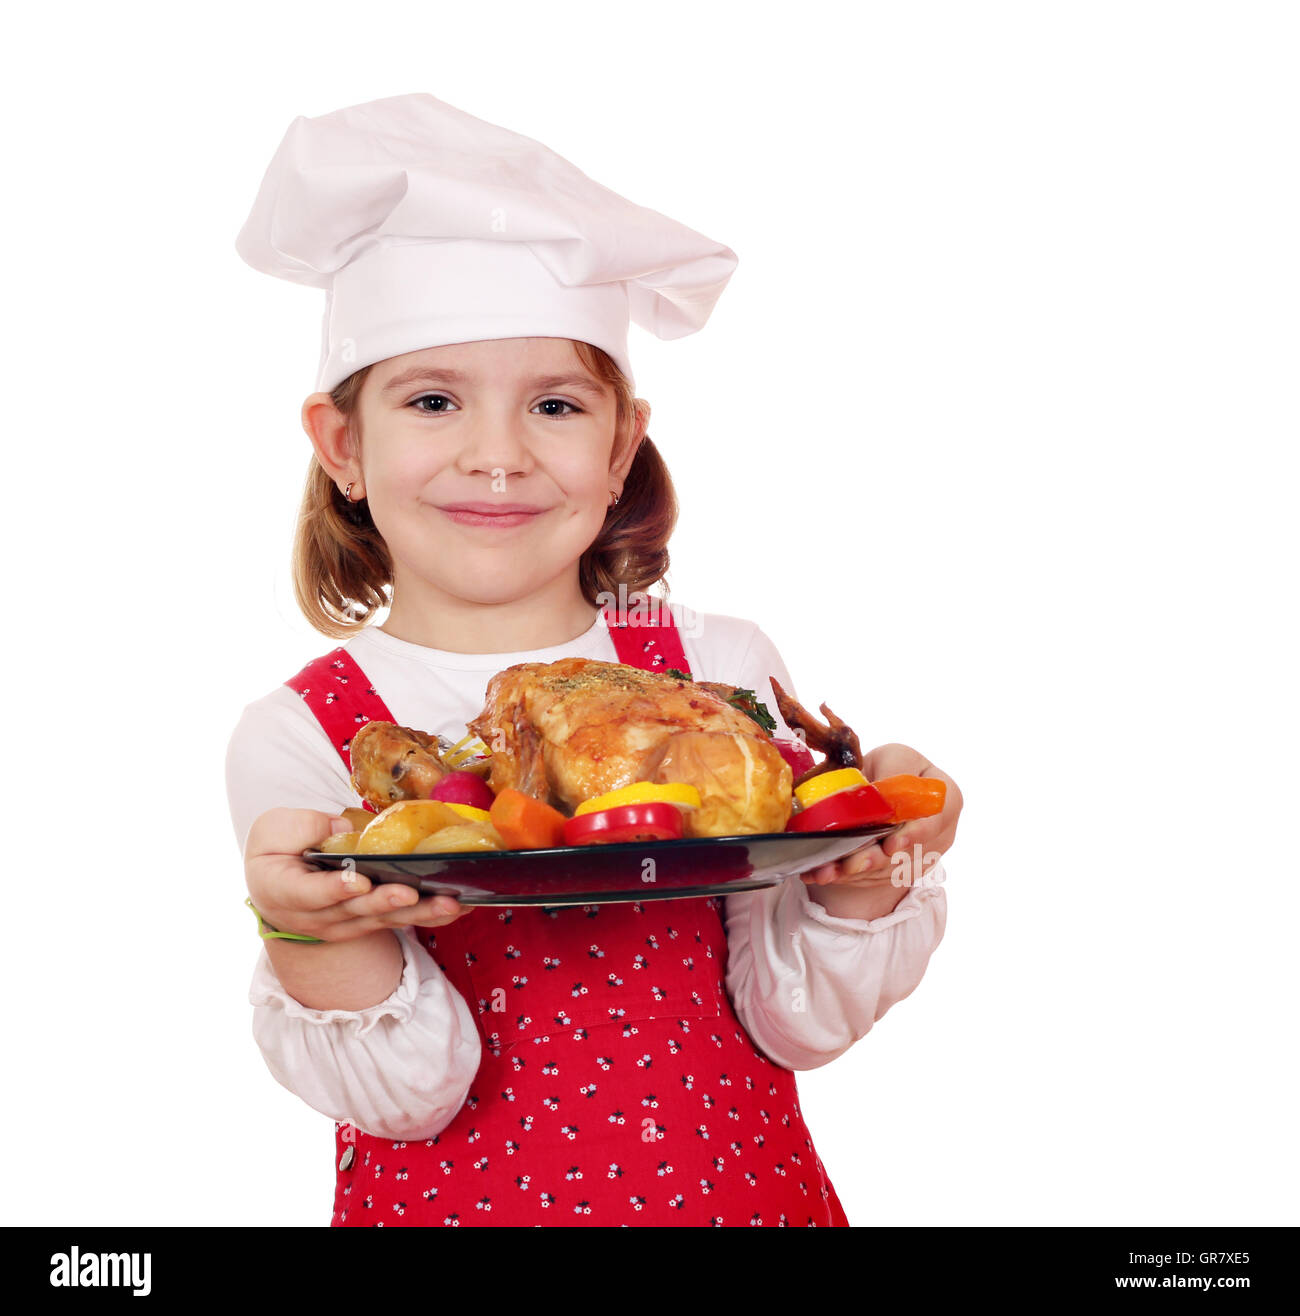 little girl cook holding roasted chicken Stock Photo